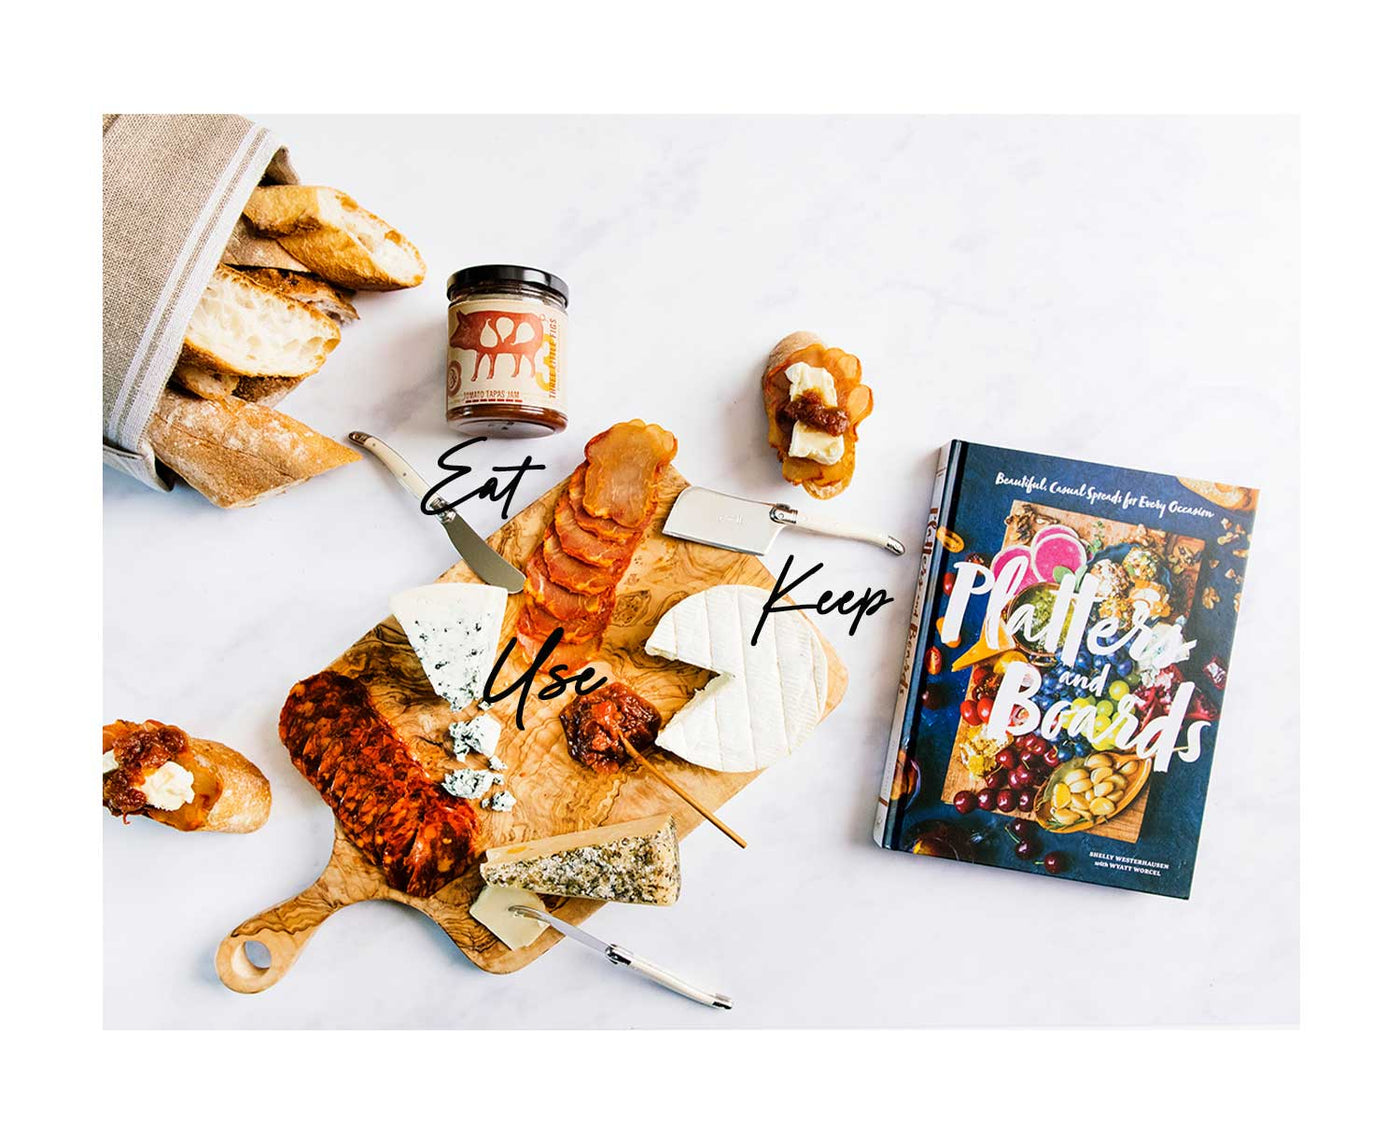 ekubox Curated Gift Boxes for all occasions. Eat, Keep and Use in every gift box.